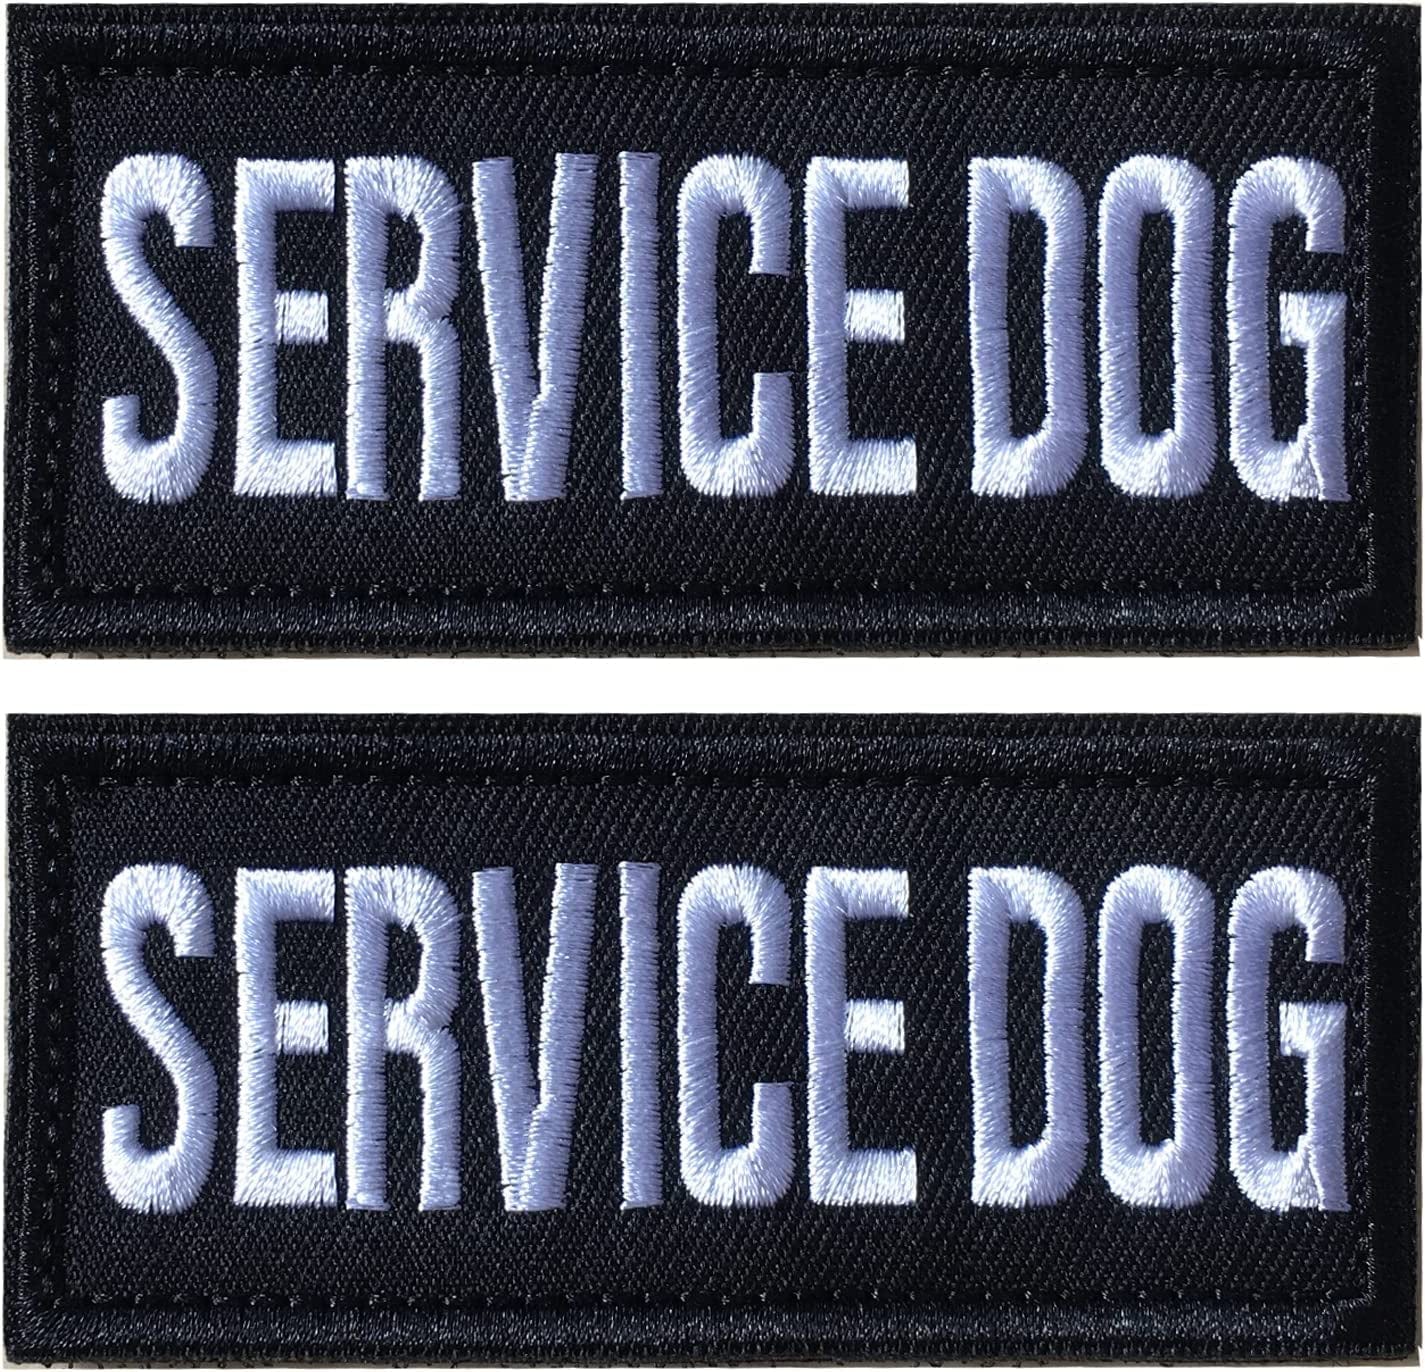 Buy 14er Tactical K9 Unit Dog Patches Embroidered Service Animal